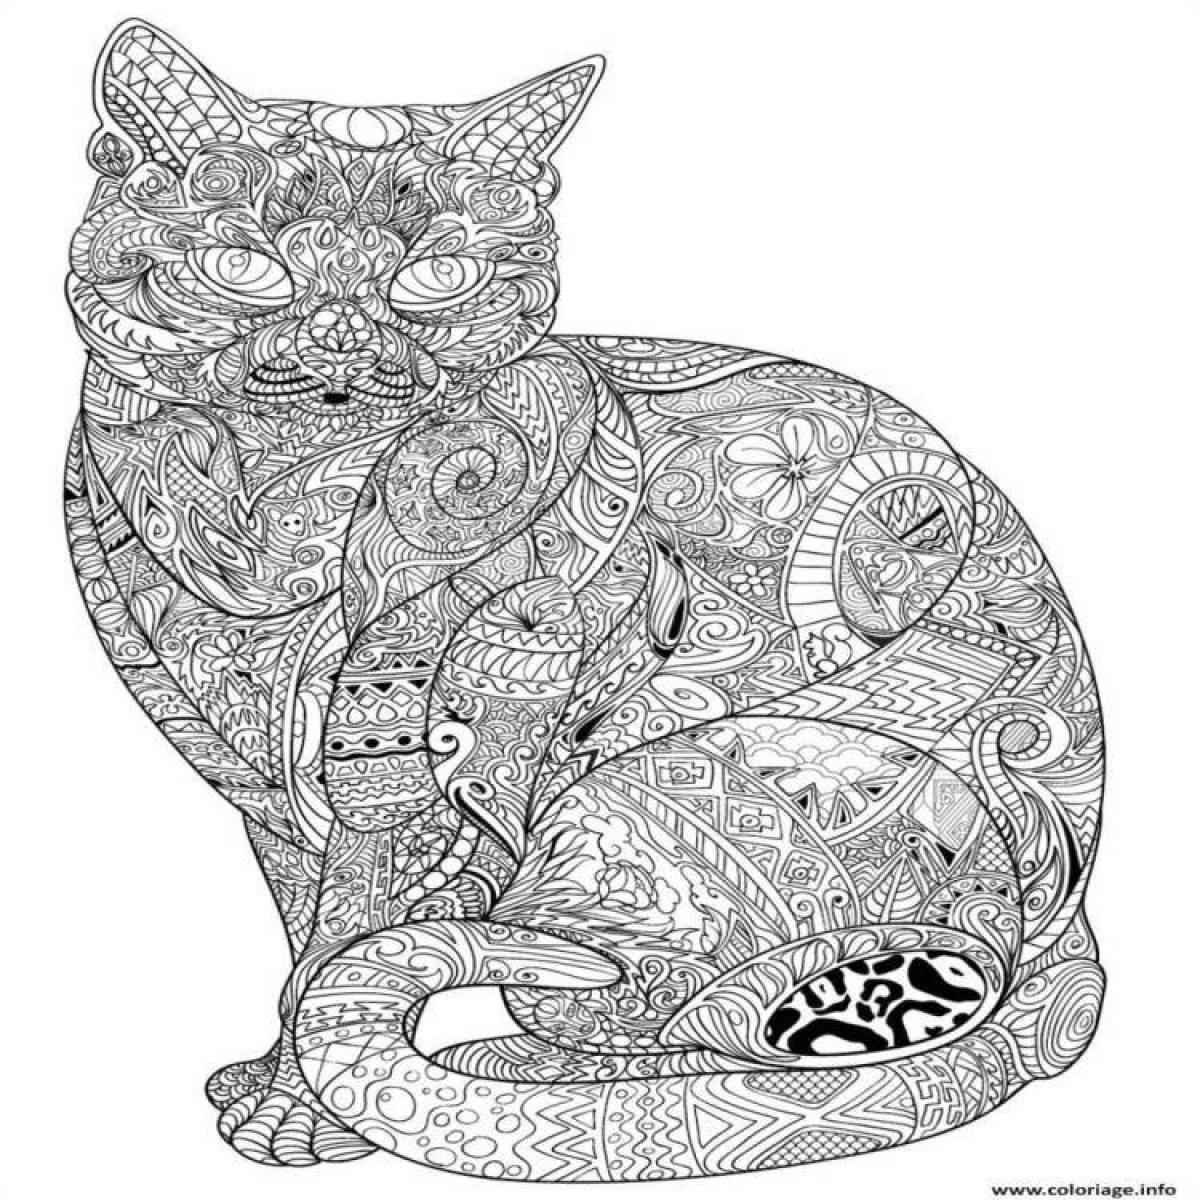 Inviting coloring page